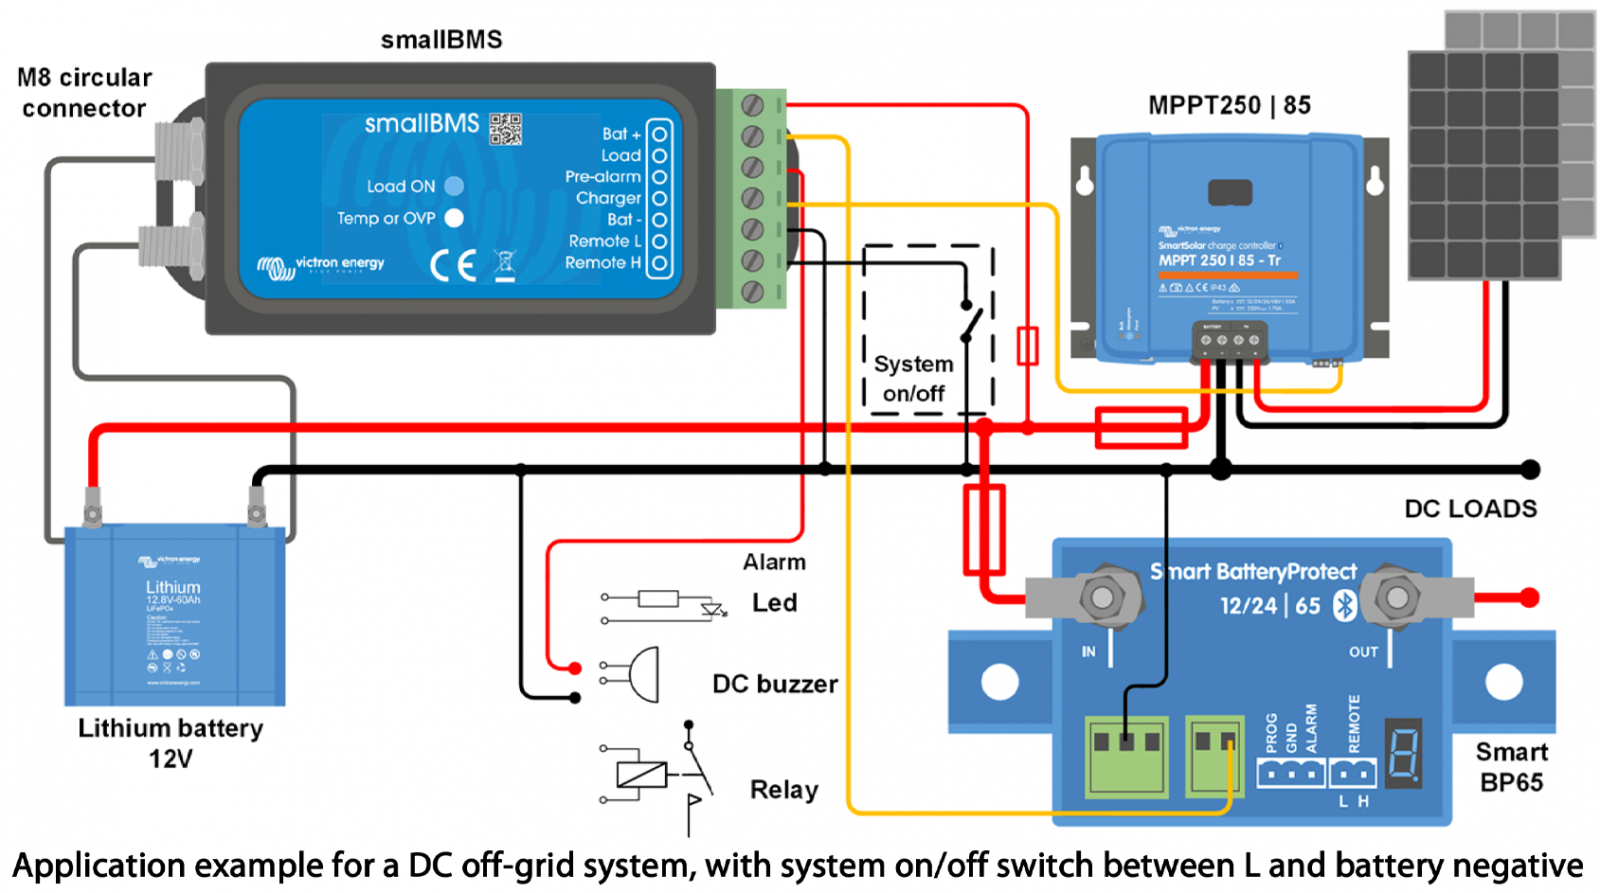 : Application example for a DC off-grid system, with system on/off switch between L and battery negative